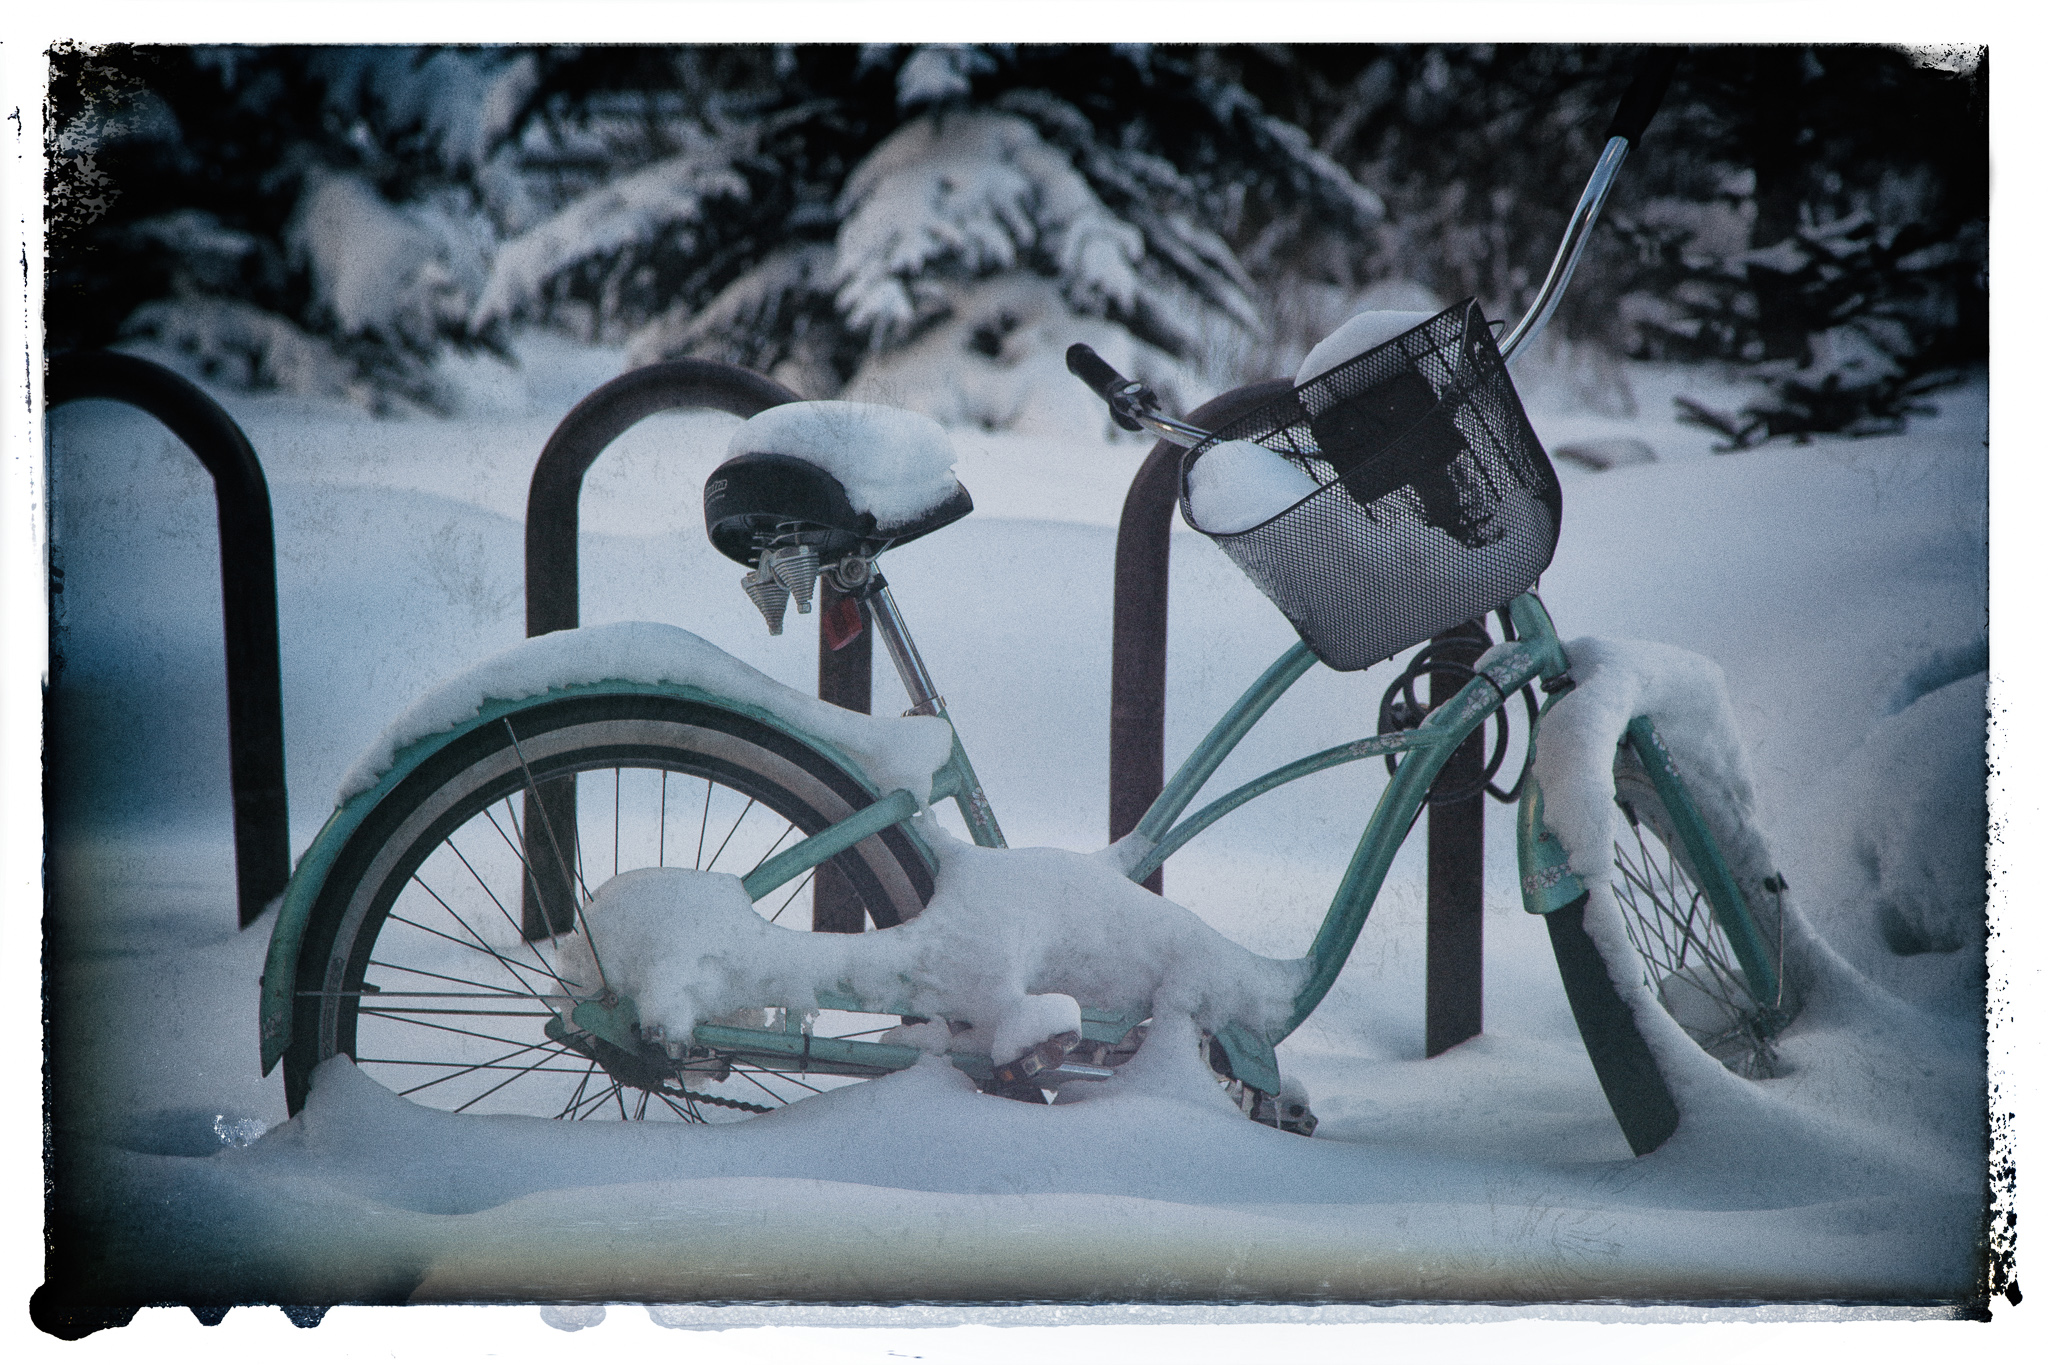 Bicycle in the Snow, Telluride, CO